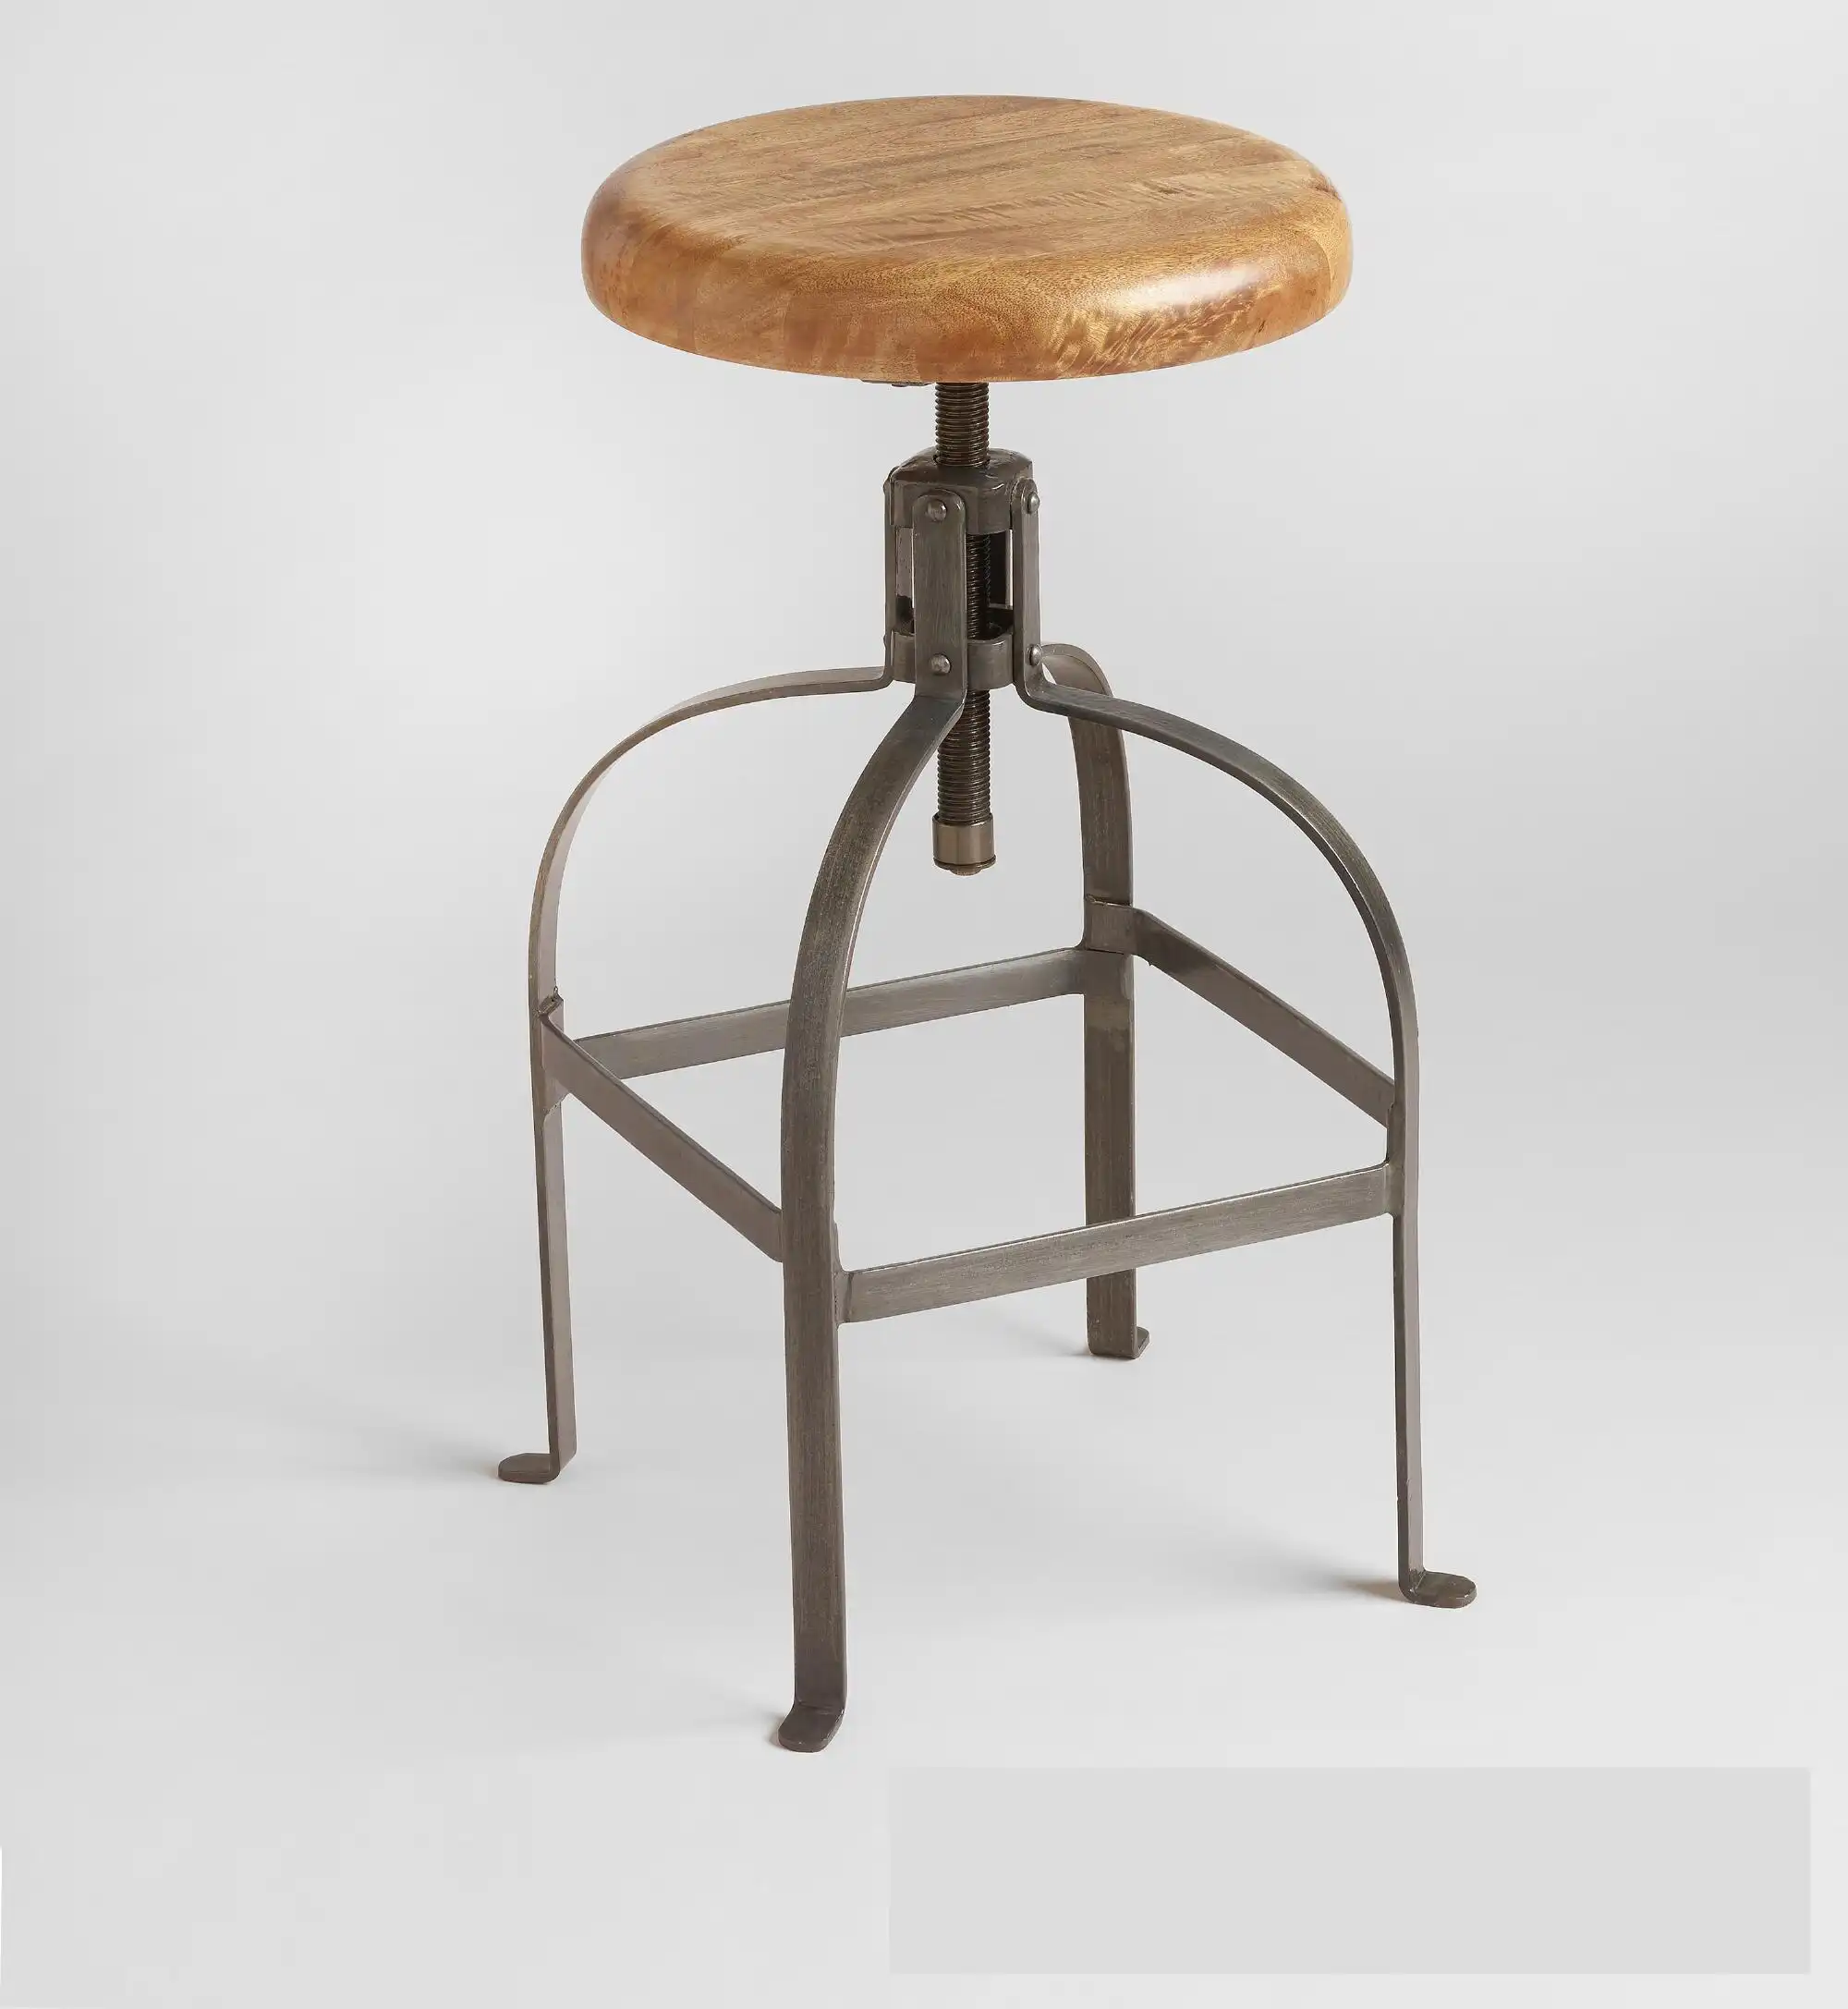 Wooden & Iron Industrial Stool with Adjustable Size - popular handicrafts